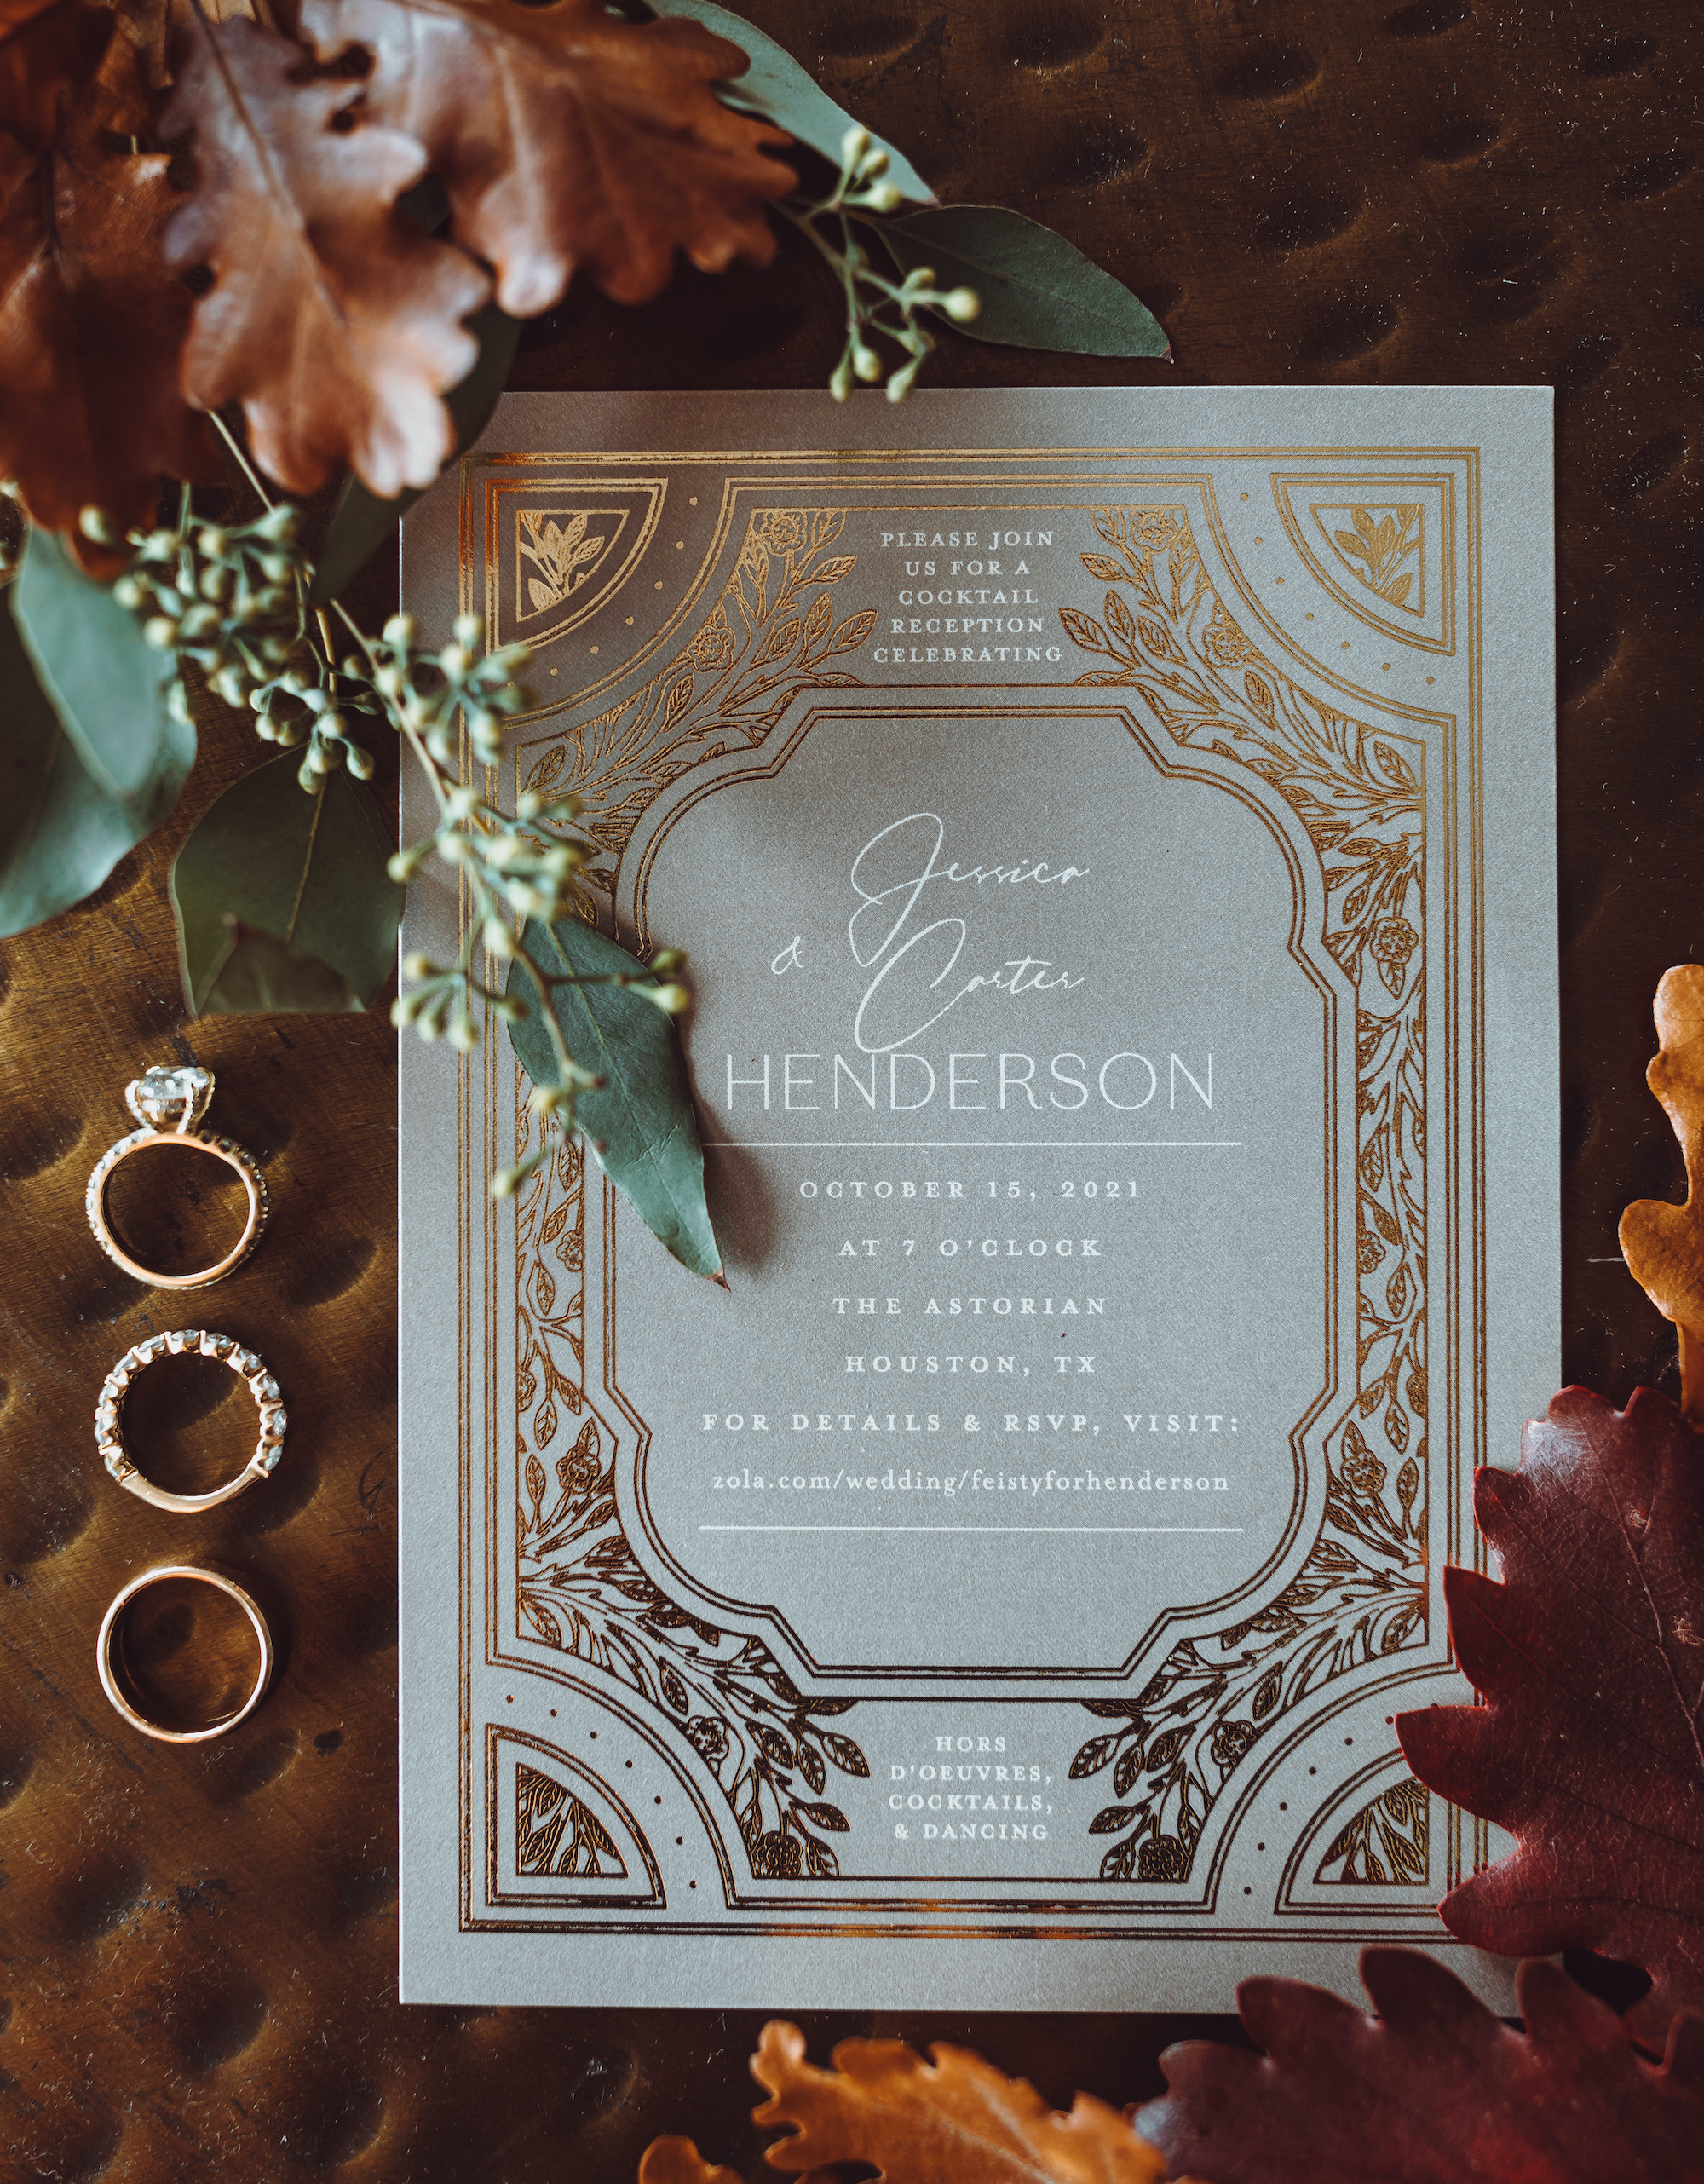 A gold-engraved wedding invitation with fall leaves surrounding it and engagement rings on one side.